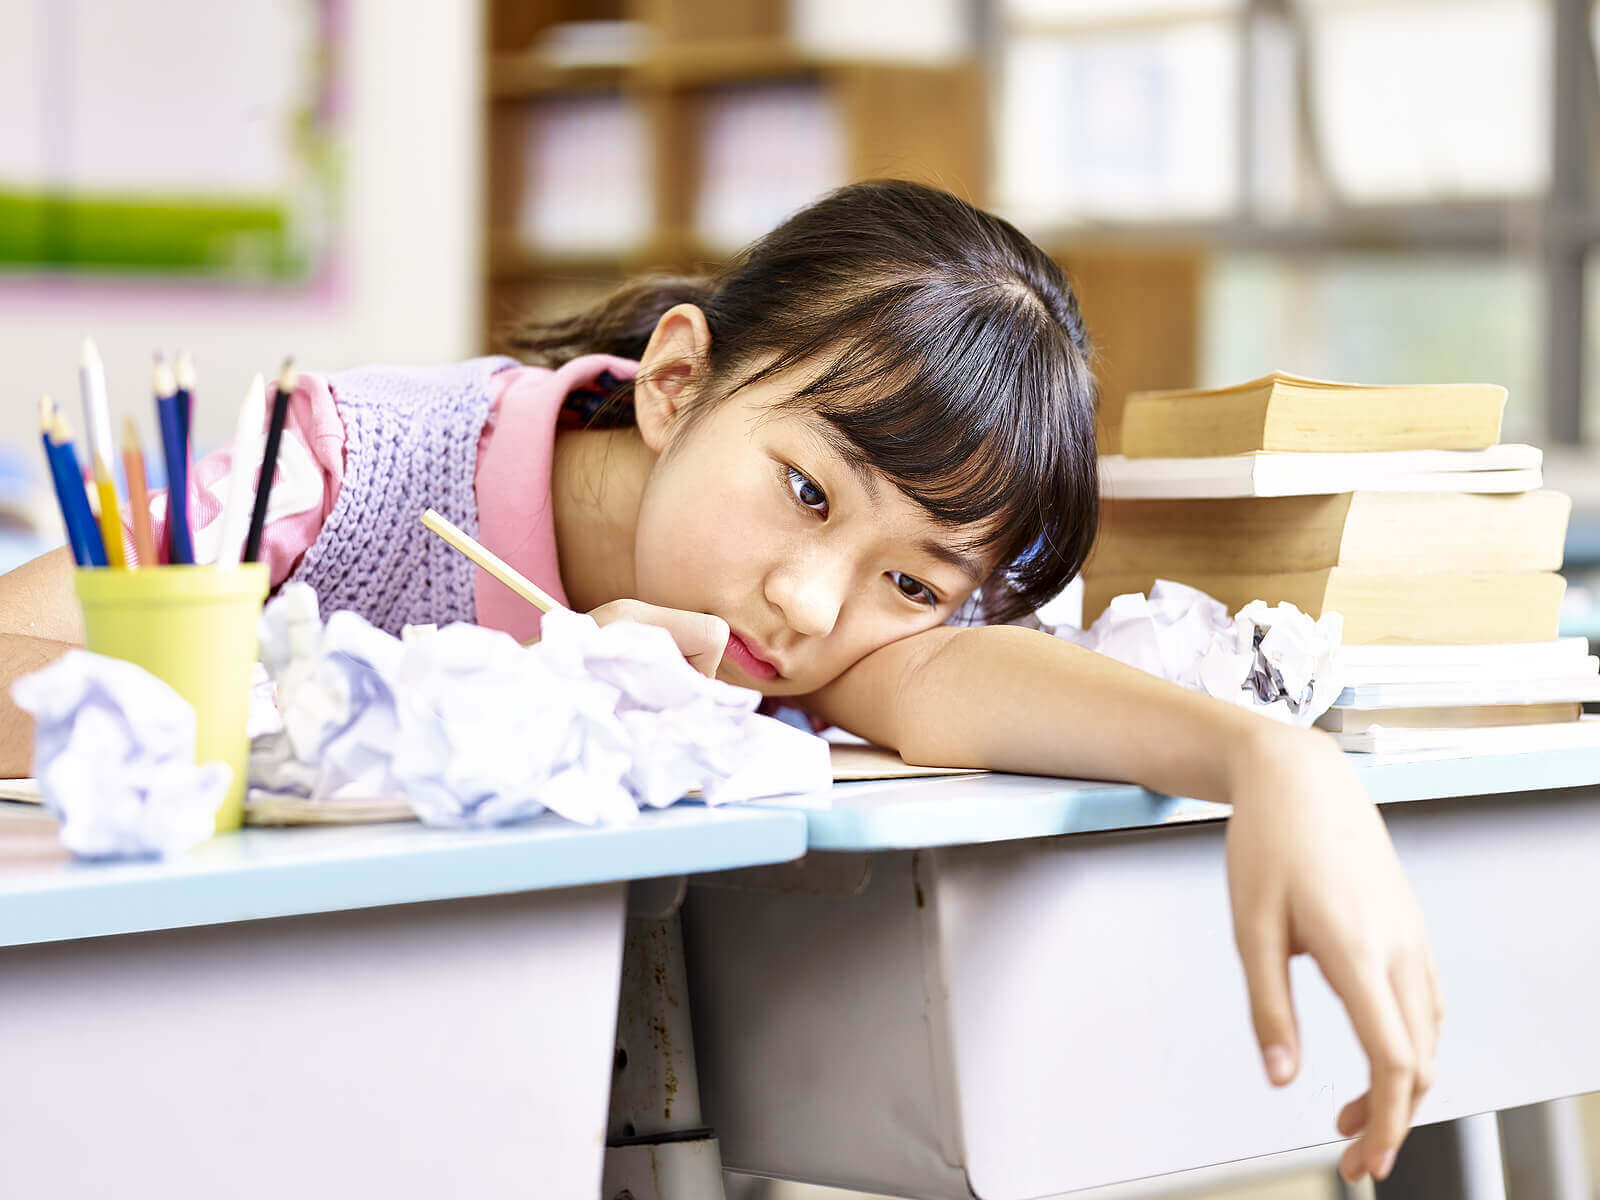 A young girl with her head on her desk looking bored.